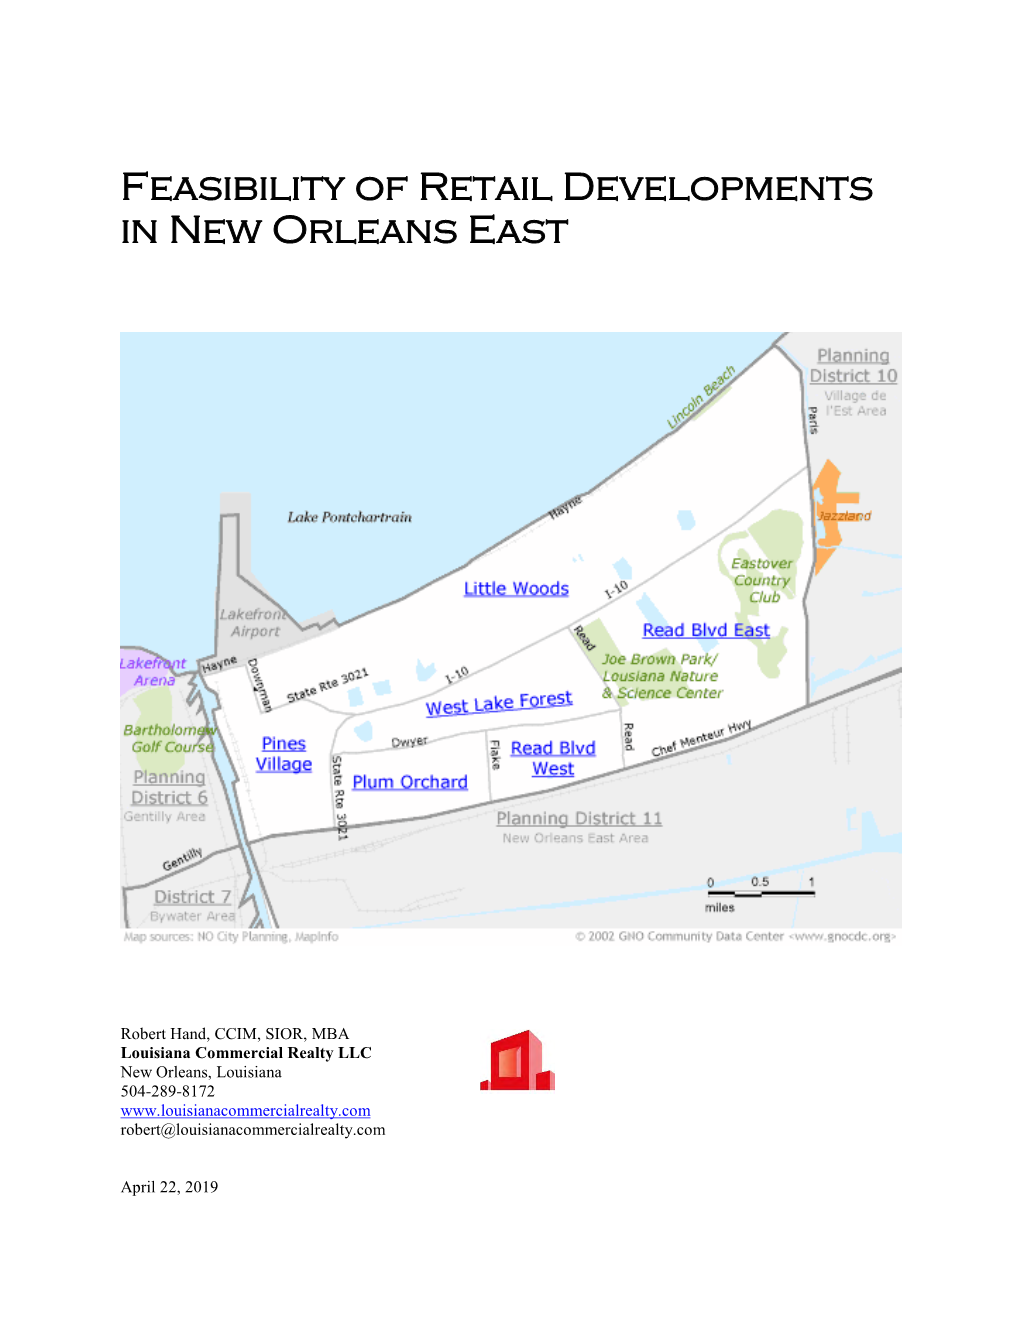 Feasibility of Retail Developments in New Orleans East